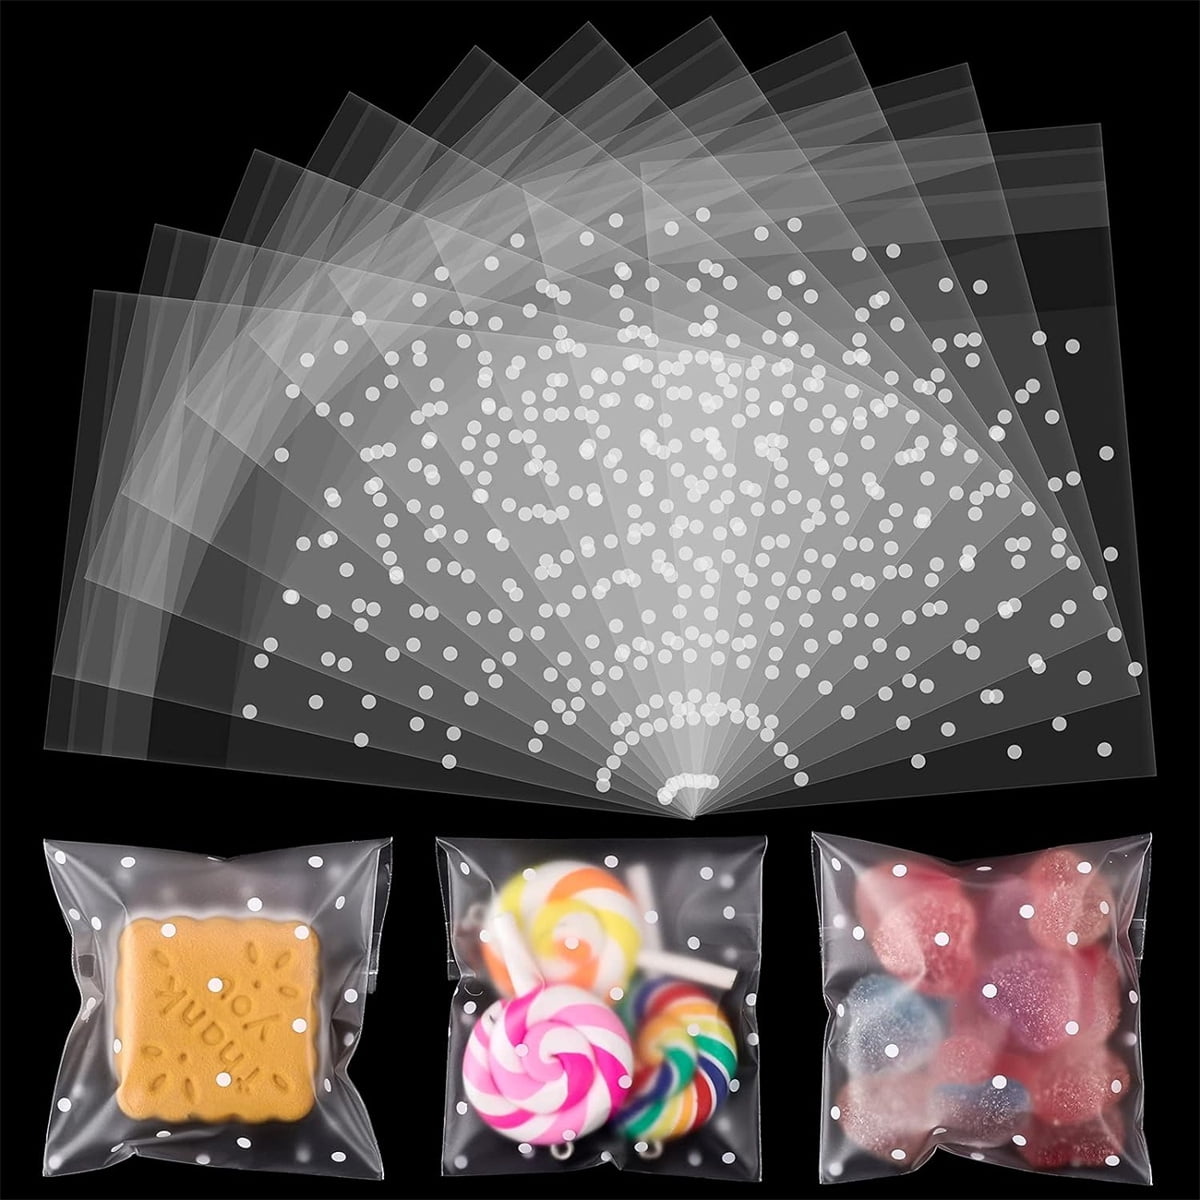 Bag Tek 12 x 18 inch Bags for Cotton Candy, 100 Greaseproof Cotton Candy Bags - Hot & Cold Friendly, Freezable, Clear PE Plastic Cotton Candy Favor Ba